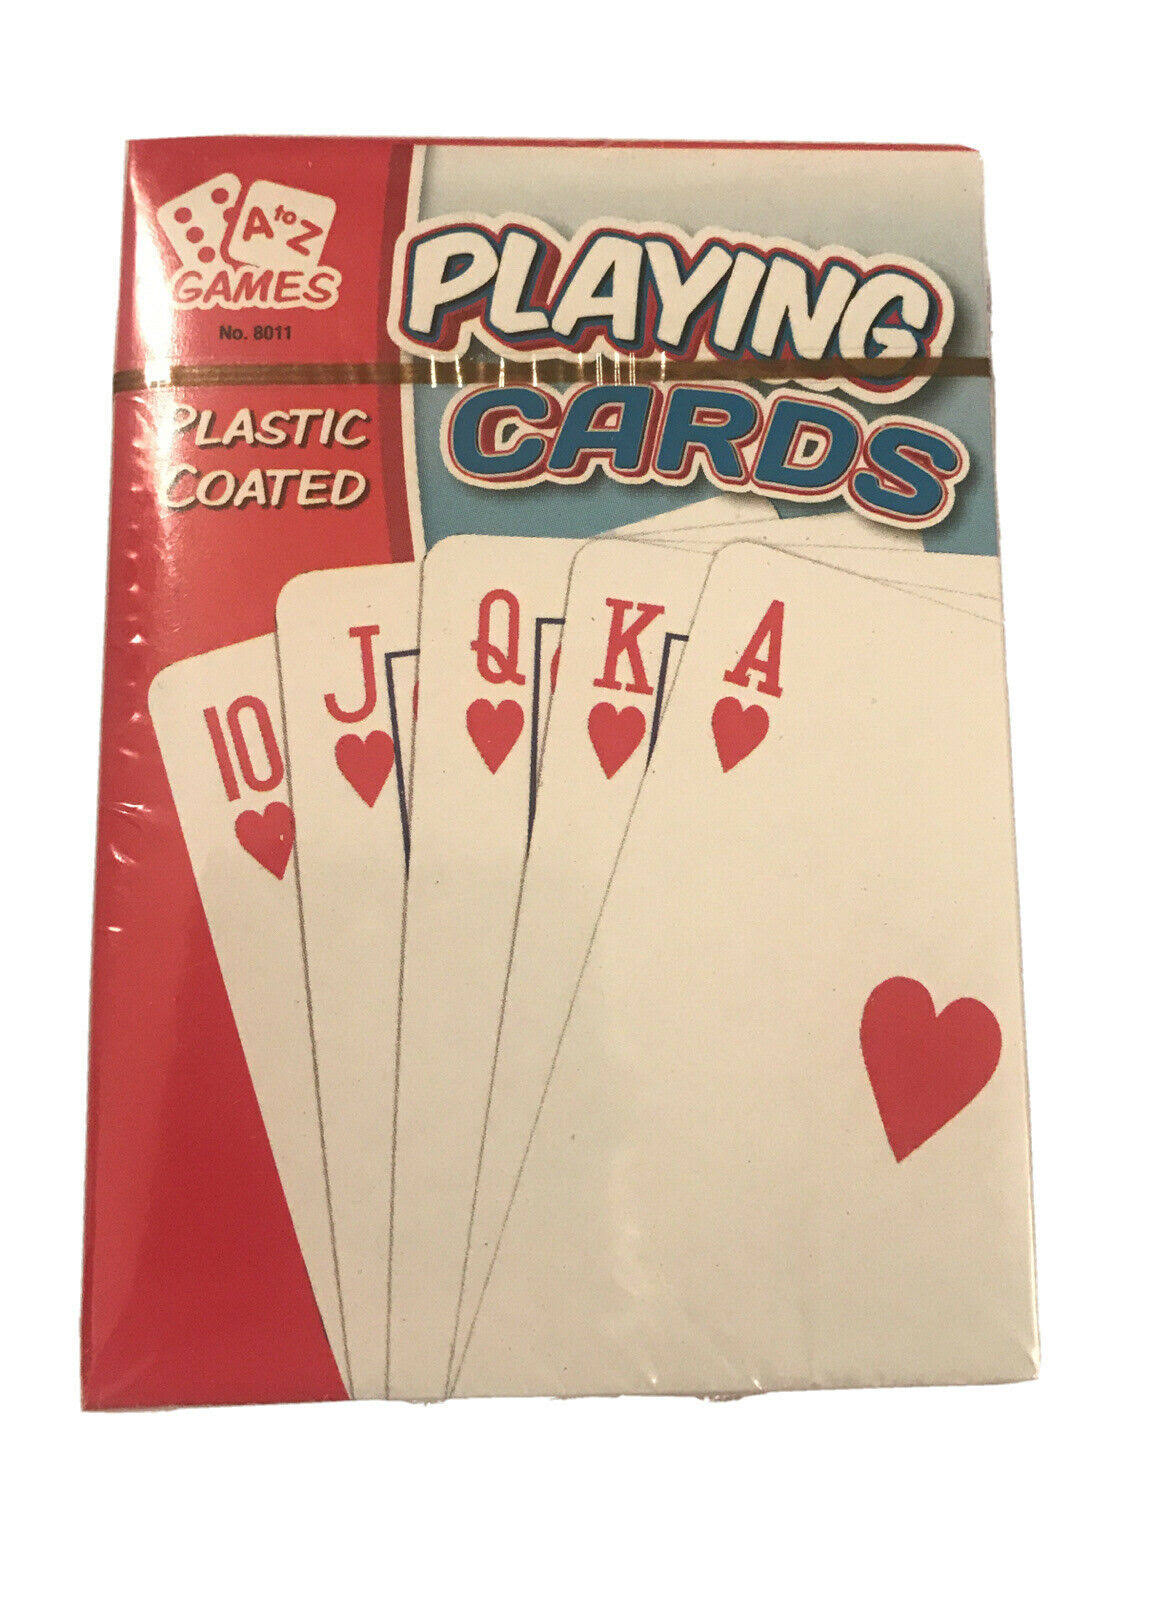 2 Packs of Playing Cards in A Box